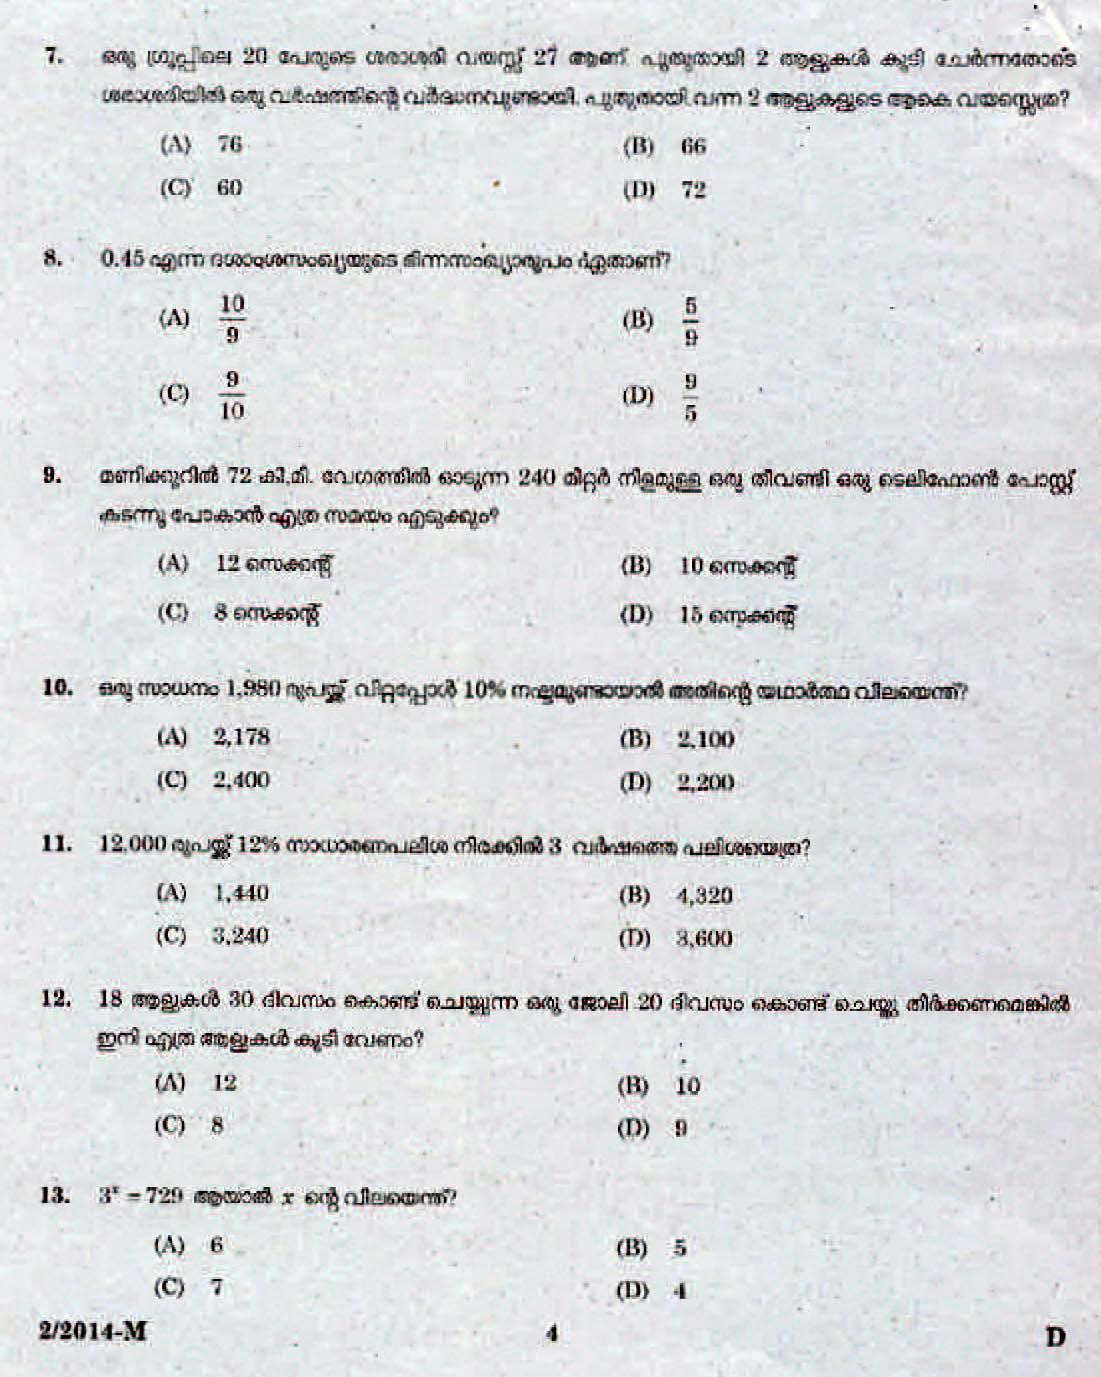 LD Clerk Question Paper Malayalam 2014 Paper Code 022014 M 1